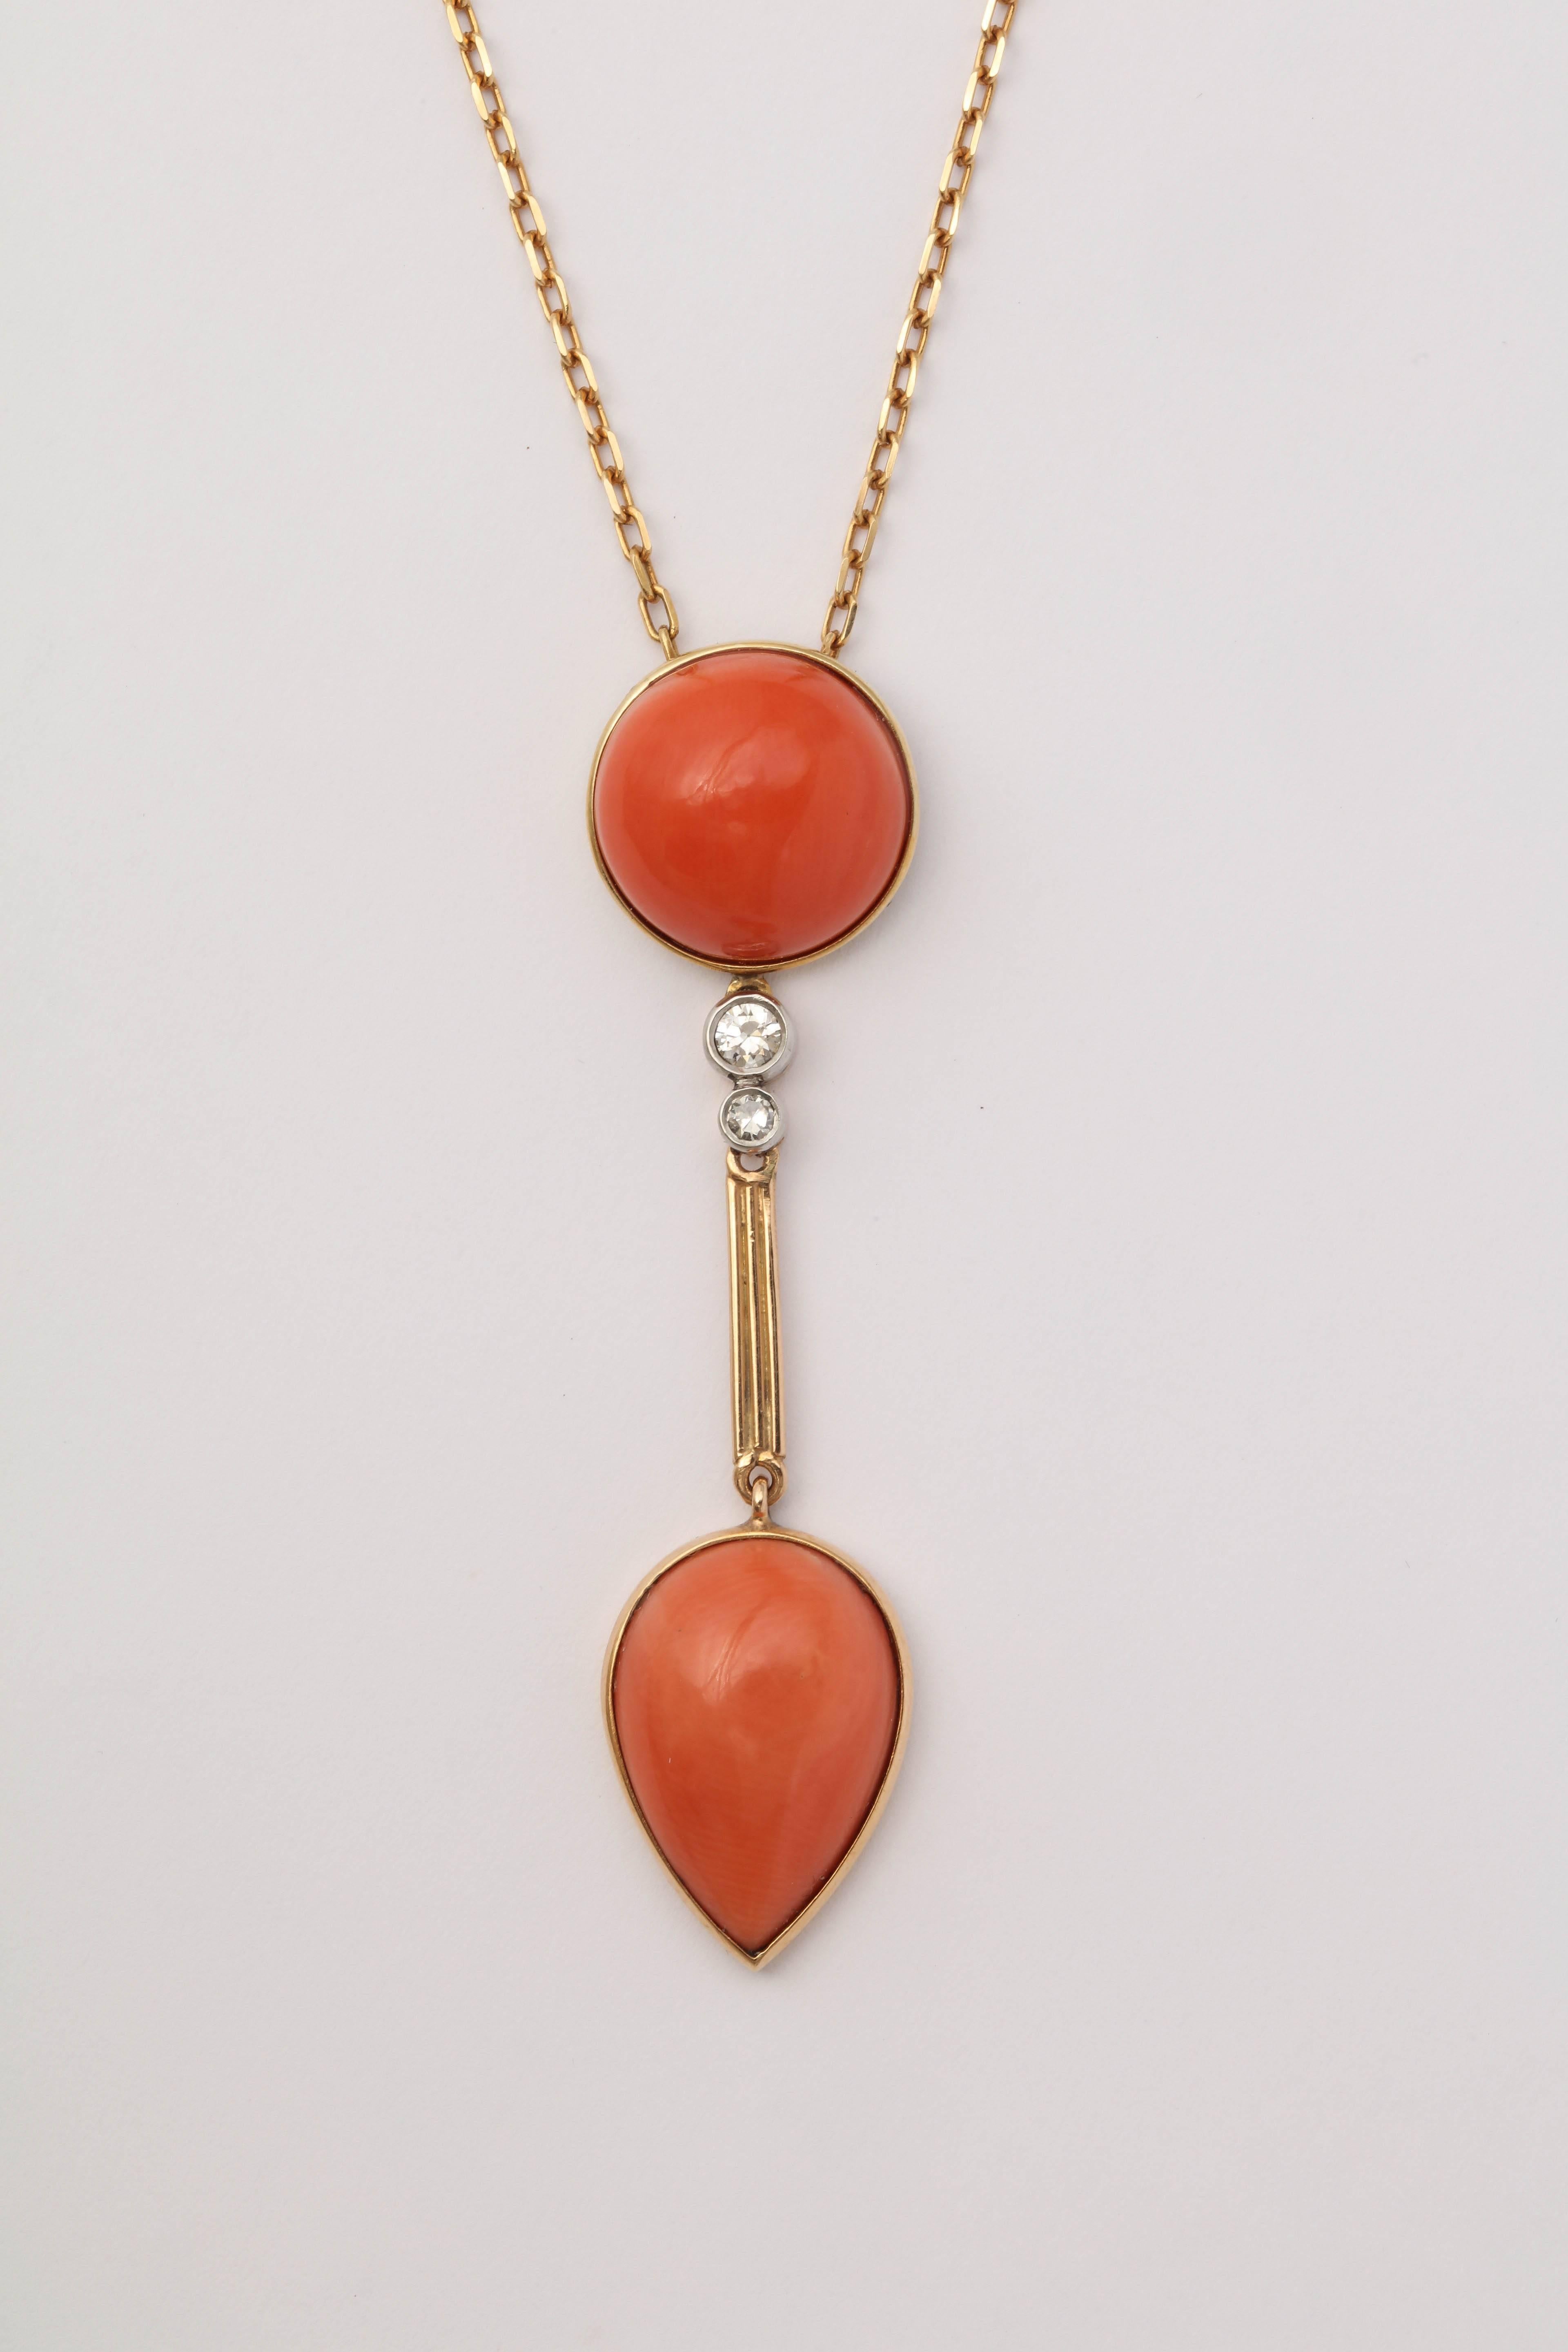 One Ladies 18kt Yellow Gold Open Box Link Chain Pendant Drop Necklace Embellished With One Bezel Set Round Cabochon Angel Skin Coral Measuring Approximately 13Mm And Further Designed With A Cabochon Bezel Set Pear Shaped Angel Skin Coral Stone